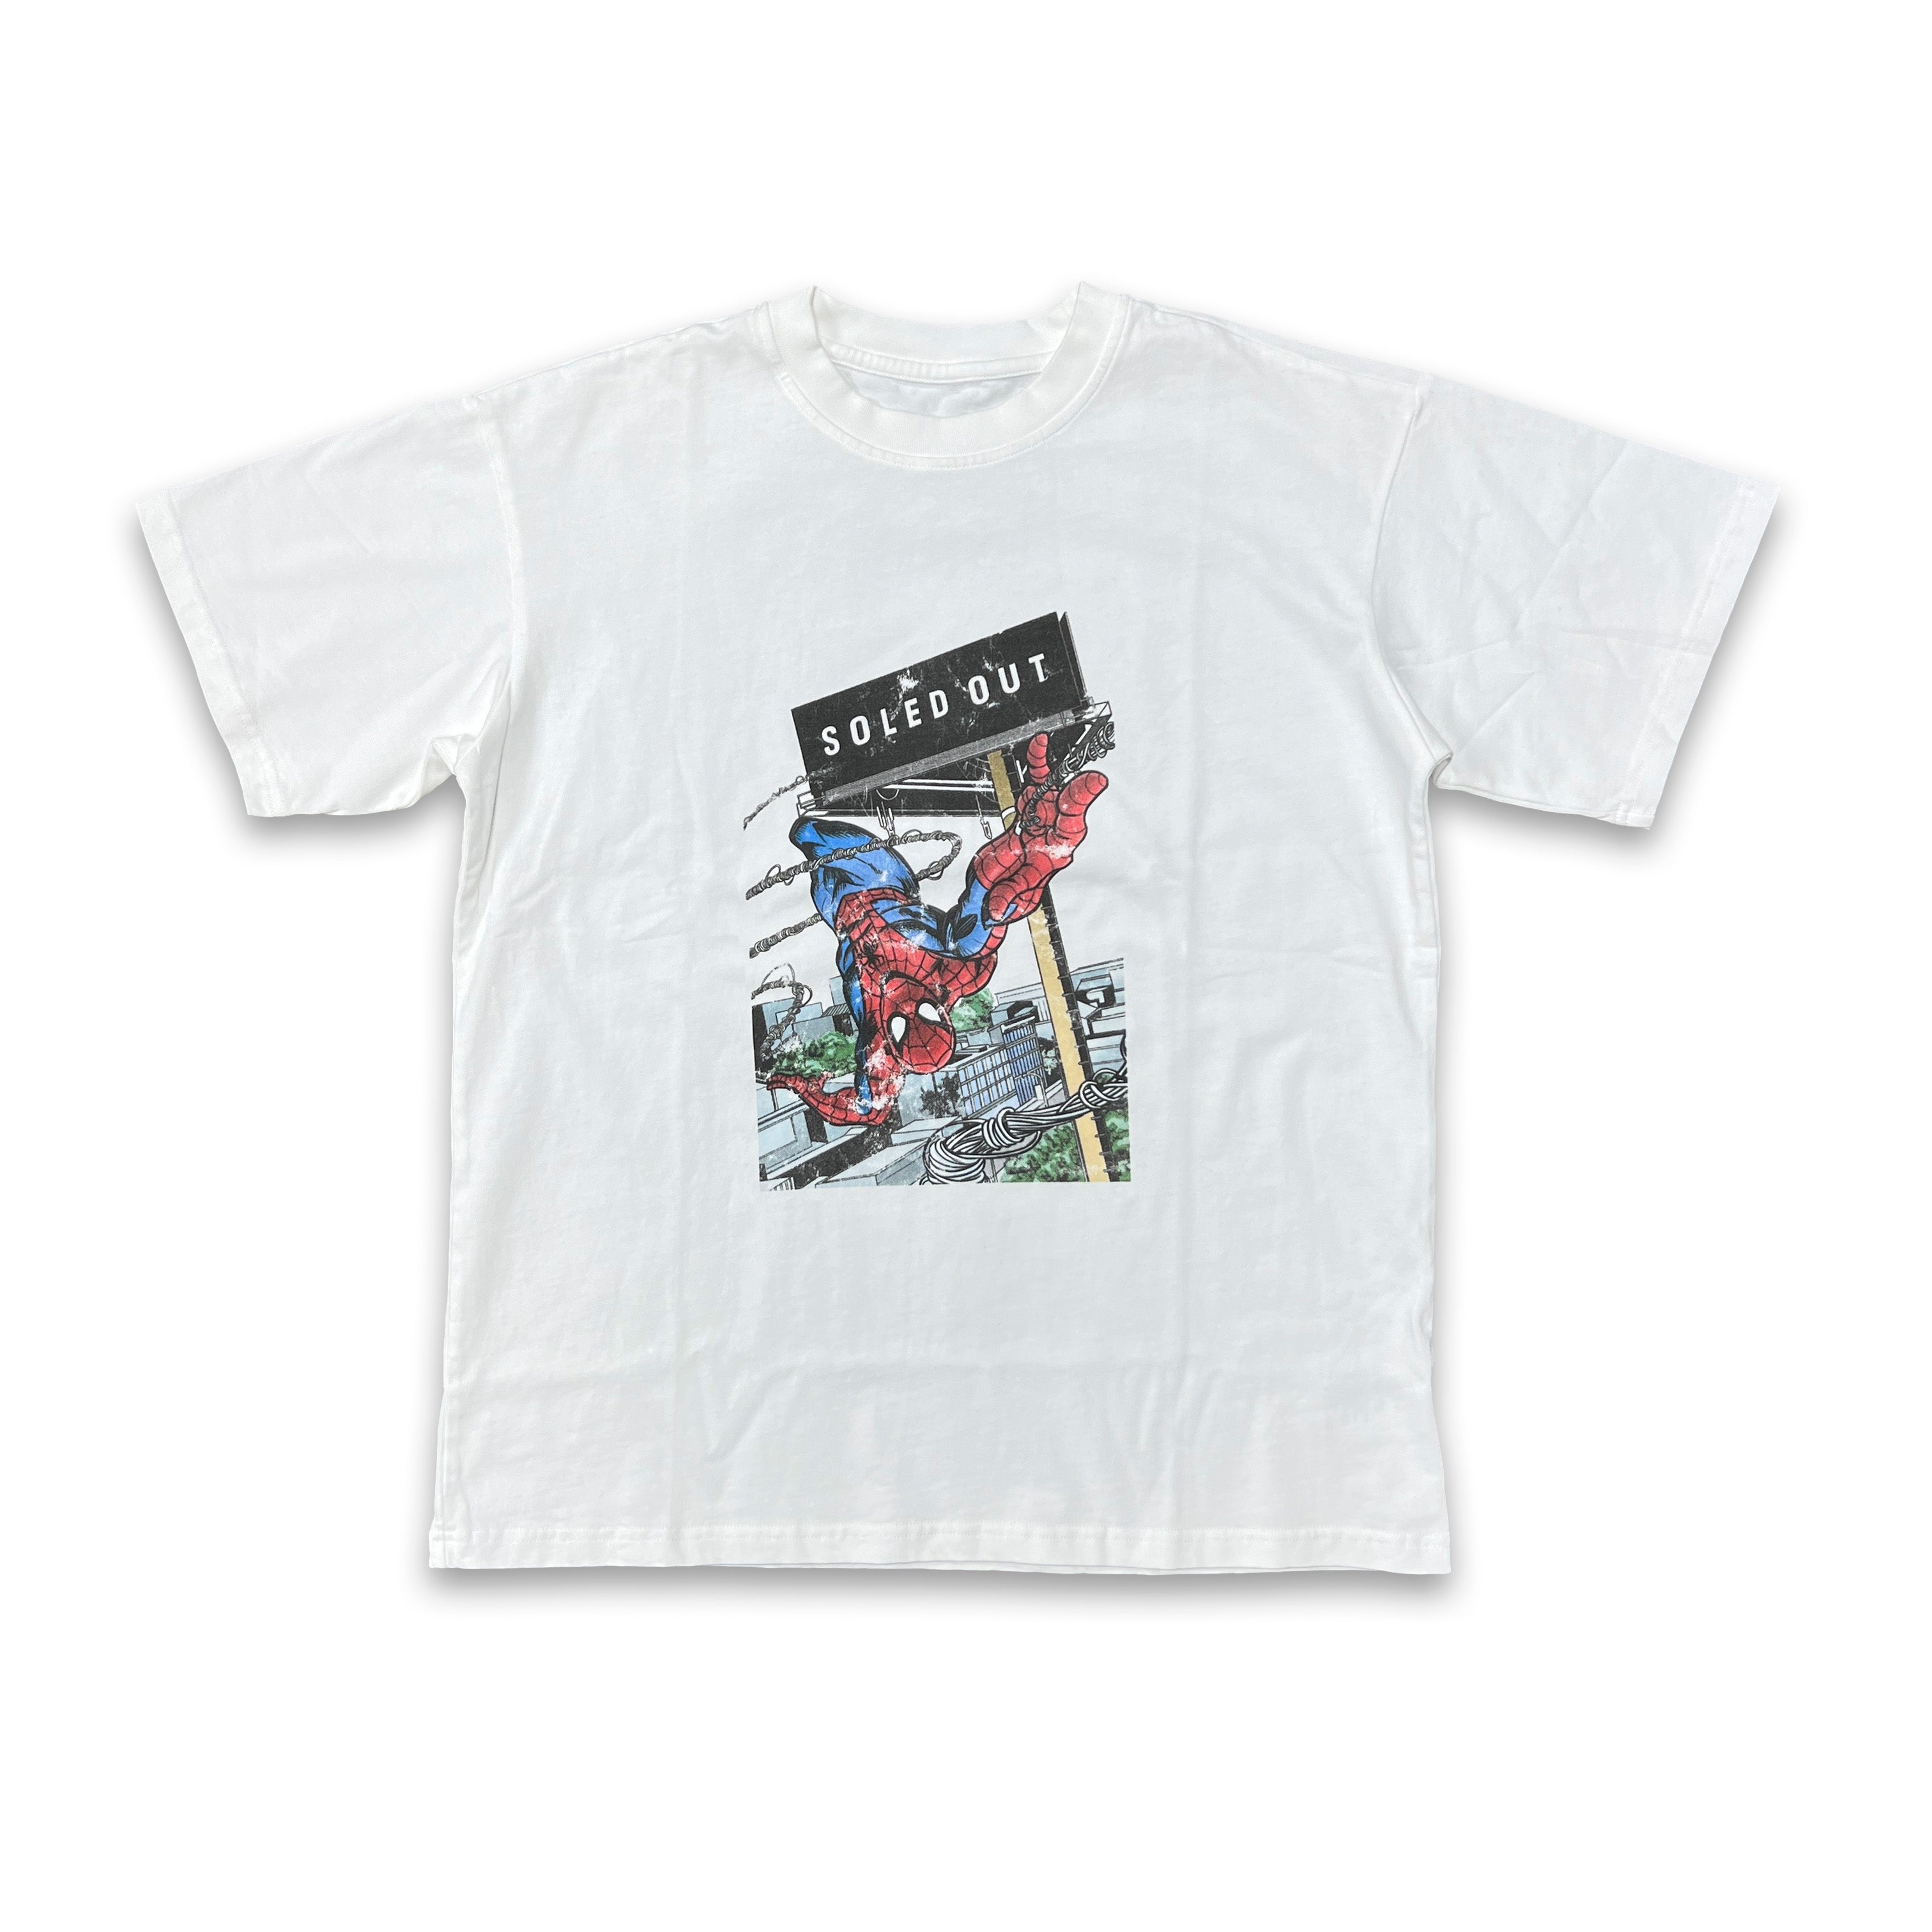 Soled Out T-Shirt "SPIDERMAN" White New Size S